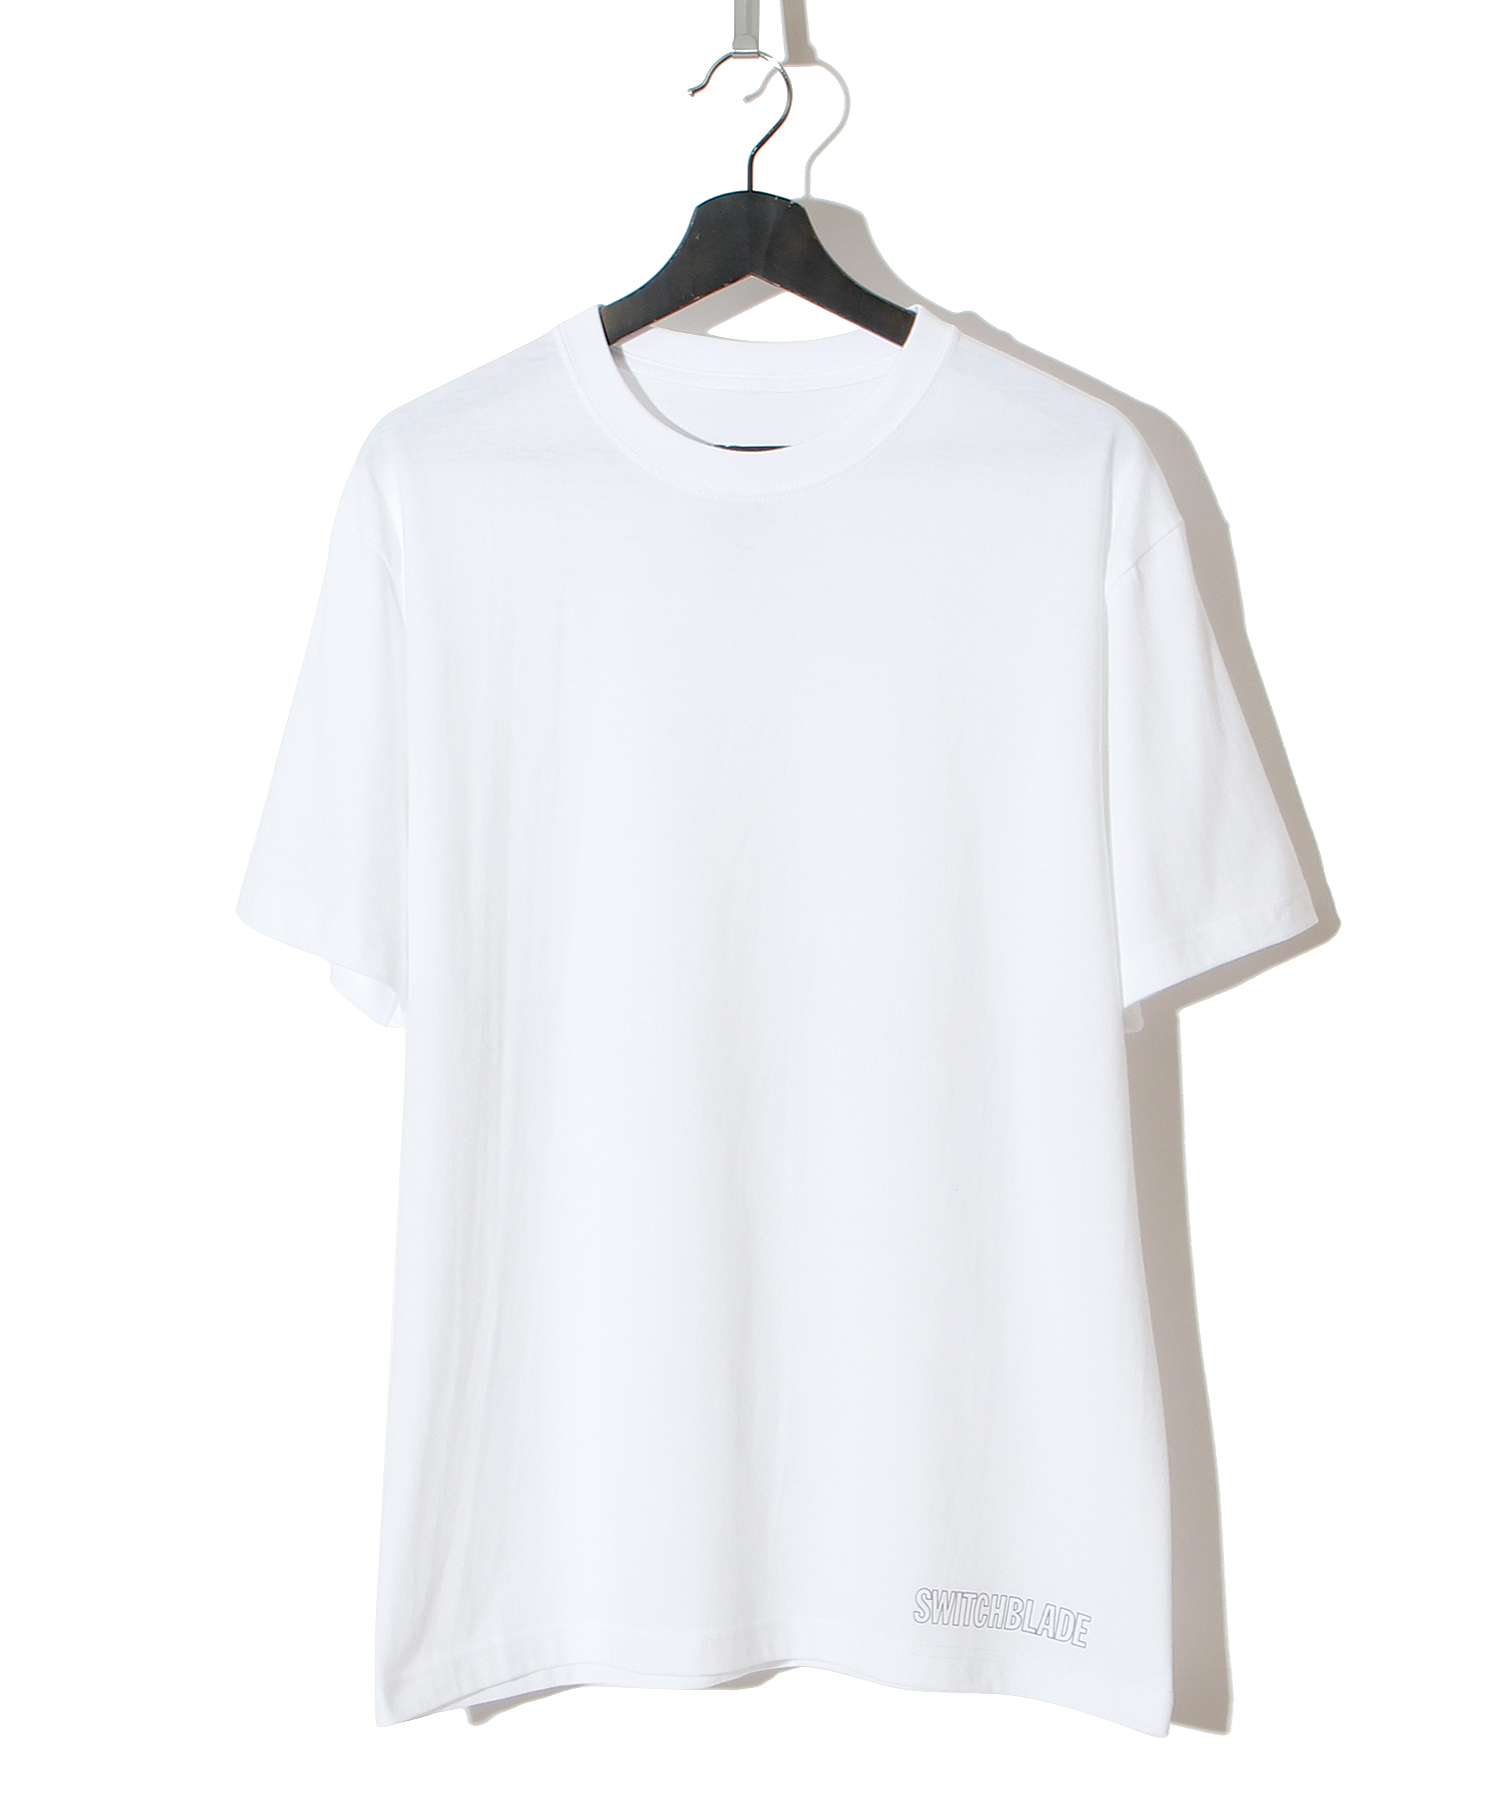 OUTLINE CHARACTERS TEE [WHITE]